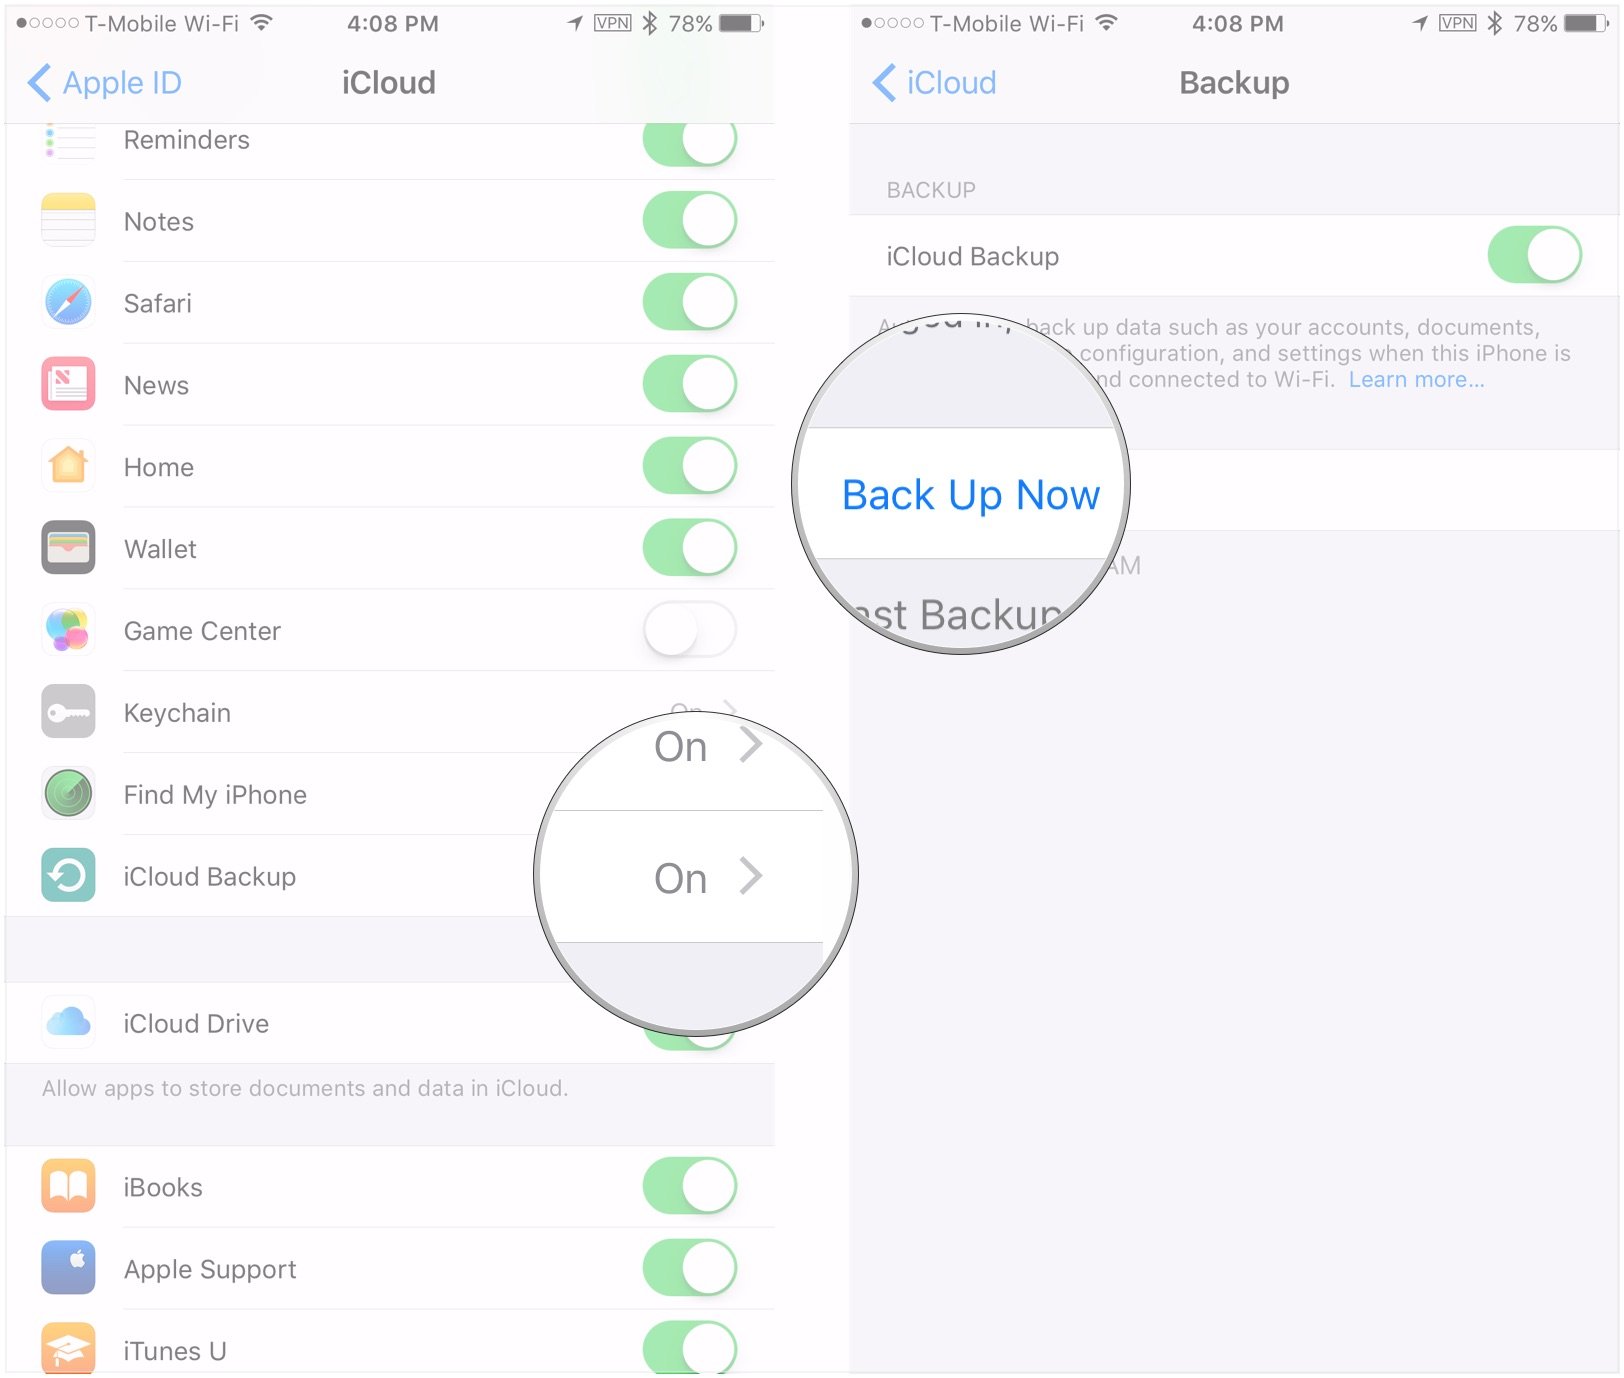 Manually triggering an iCloud backup showing how to tap iCloud Backup, then tap Back Up Now